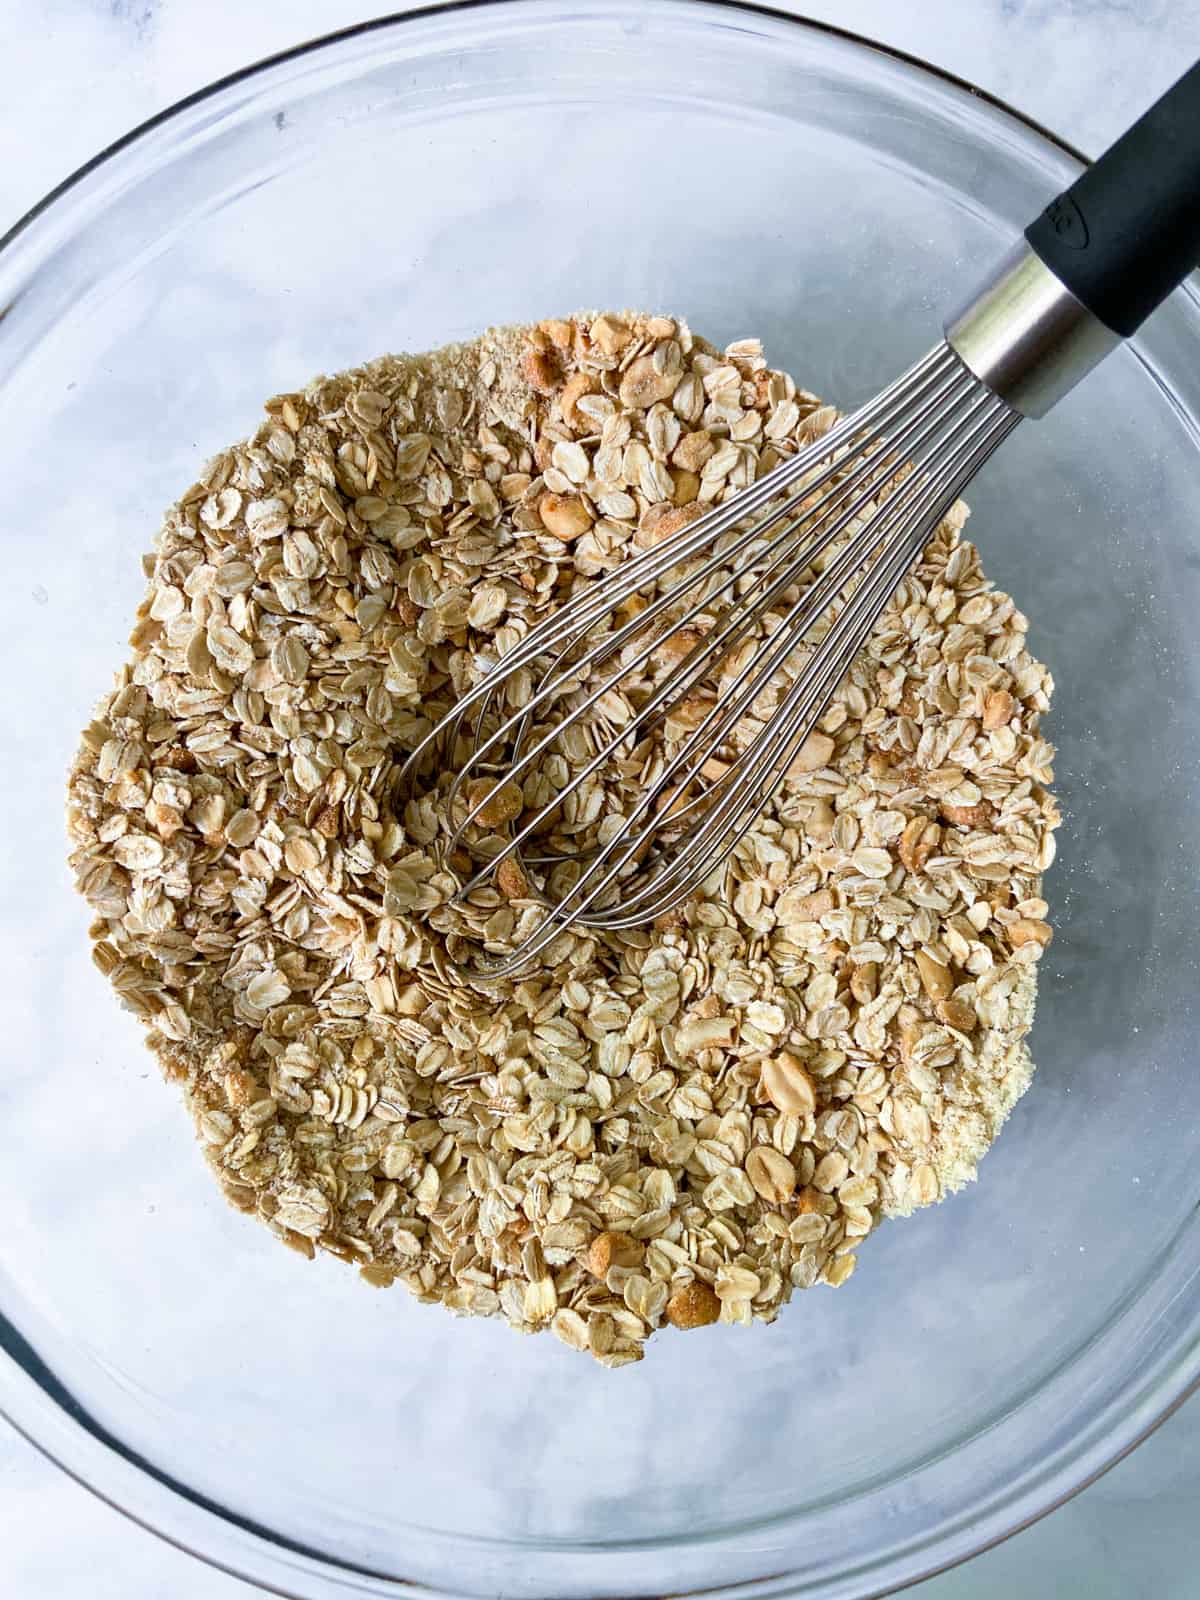 Oats, almond flour, and peanuts with a whisk in a bowl.